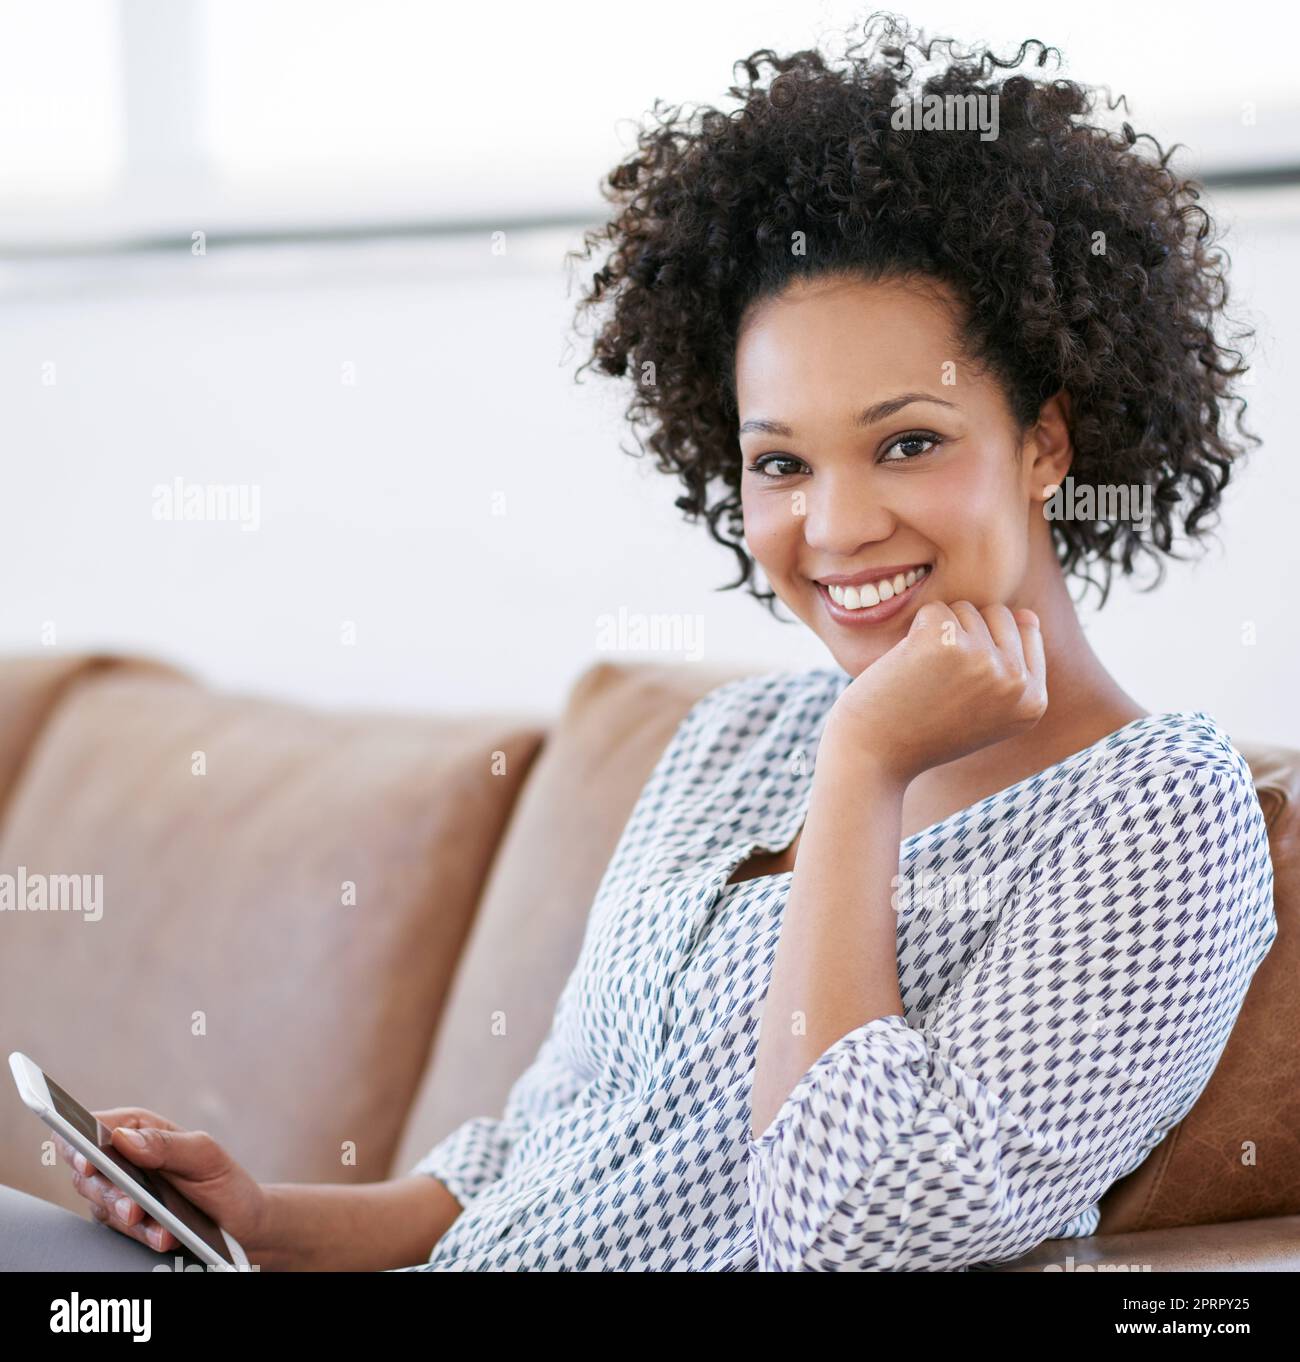 Nowhere more relaxing than home. Portrait of an attractive woman sitting on the sofa with her smartphone. Stock Photo